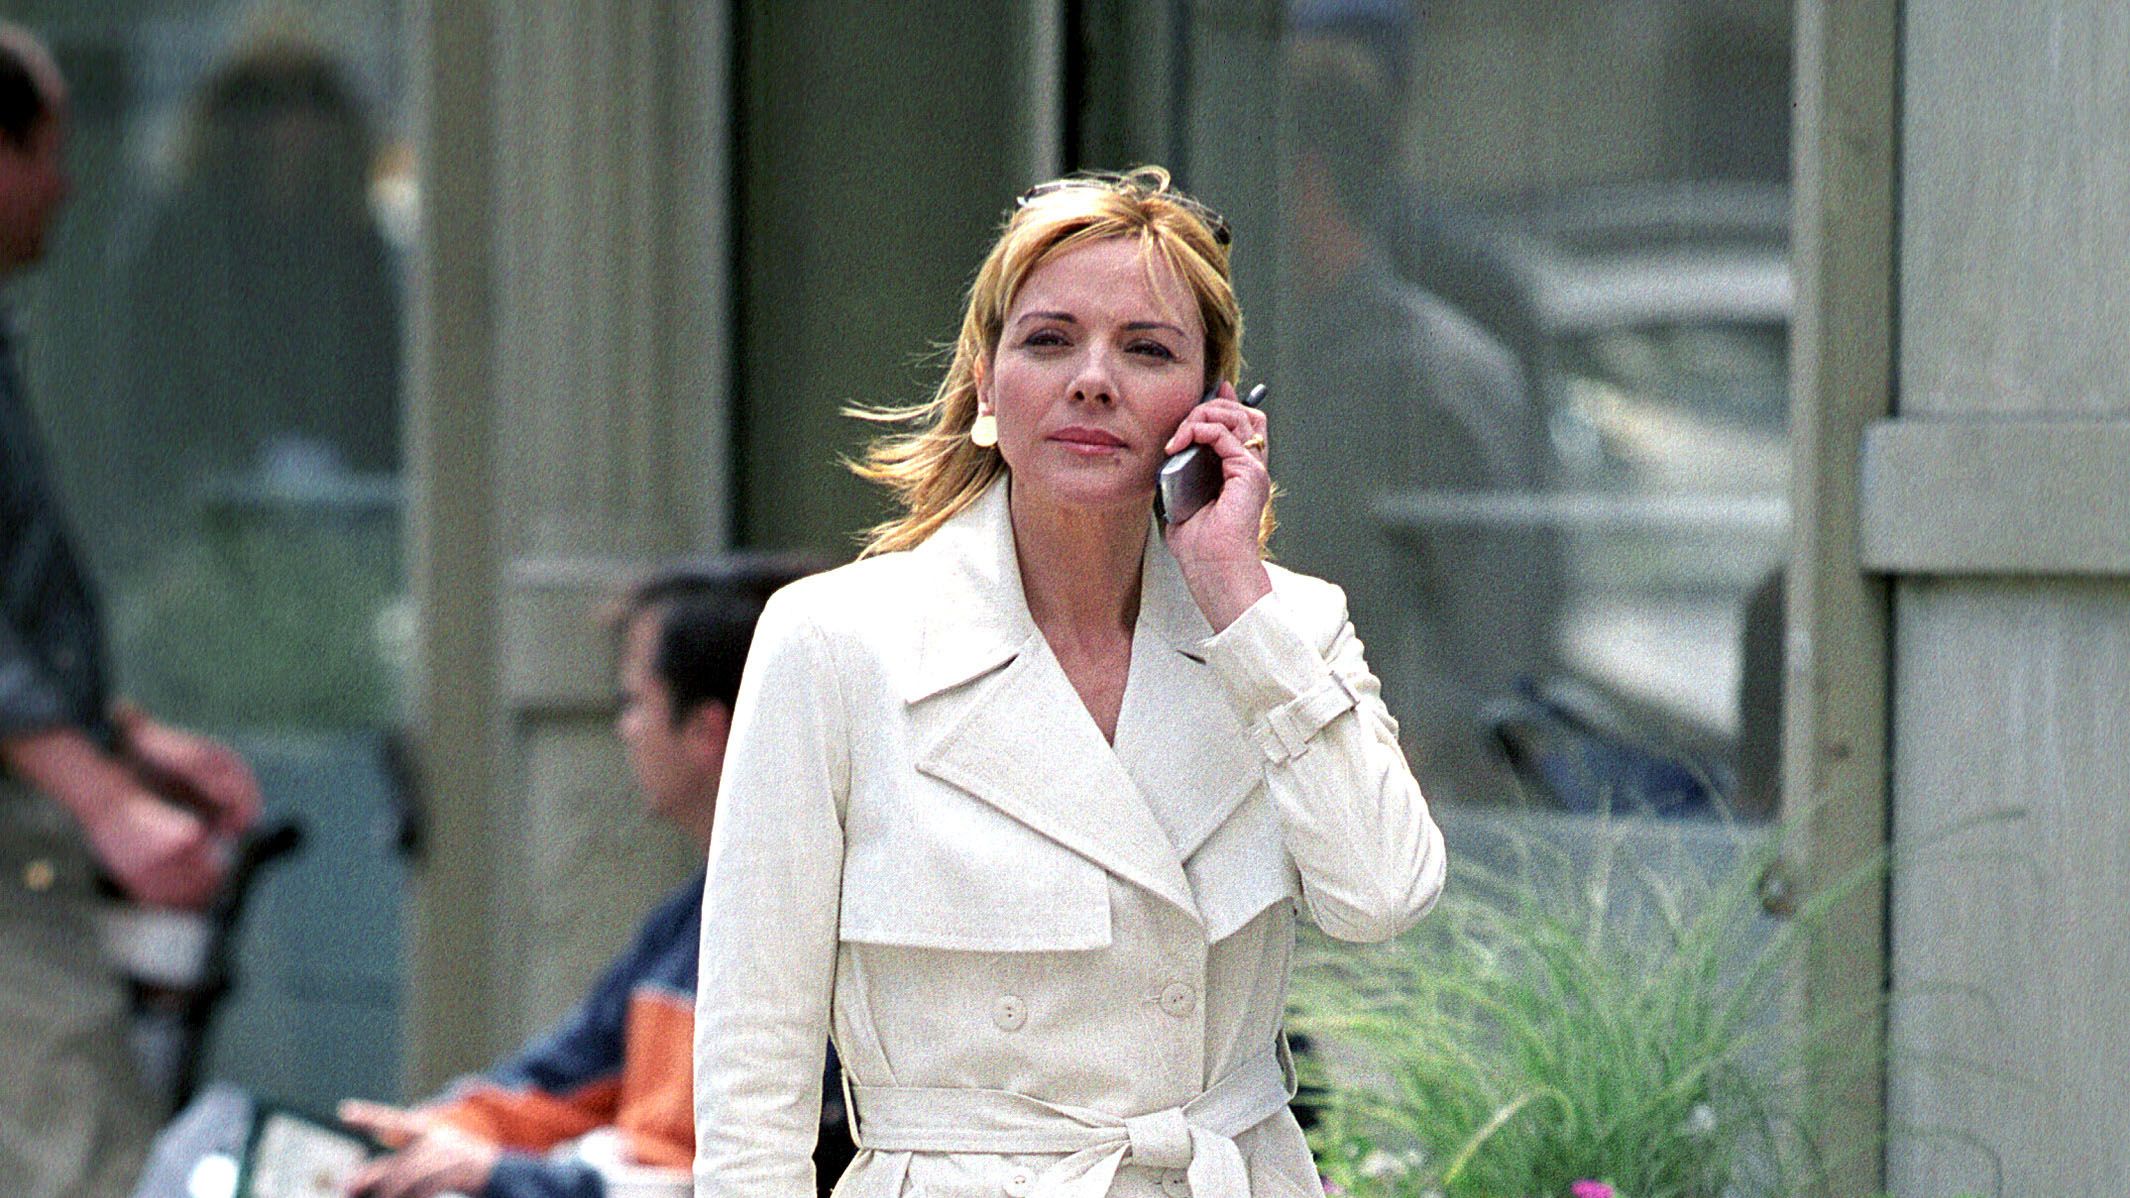 https://hips.hearstapps.com/hmg-prod/images/kim-cattrall-during-kim-cattrall-filming-sex-and-the-city-news-photo-1685625480.jpg?crop=1xw:0.39938xh;center,top